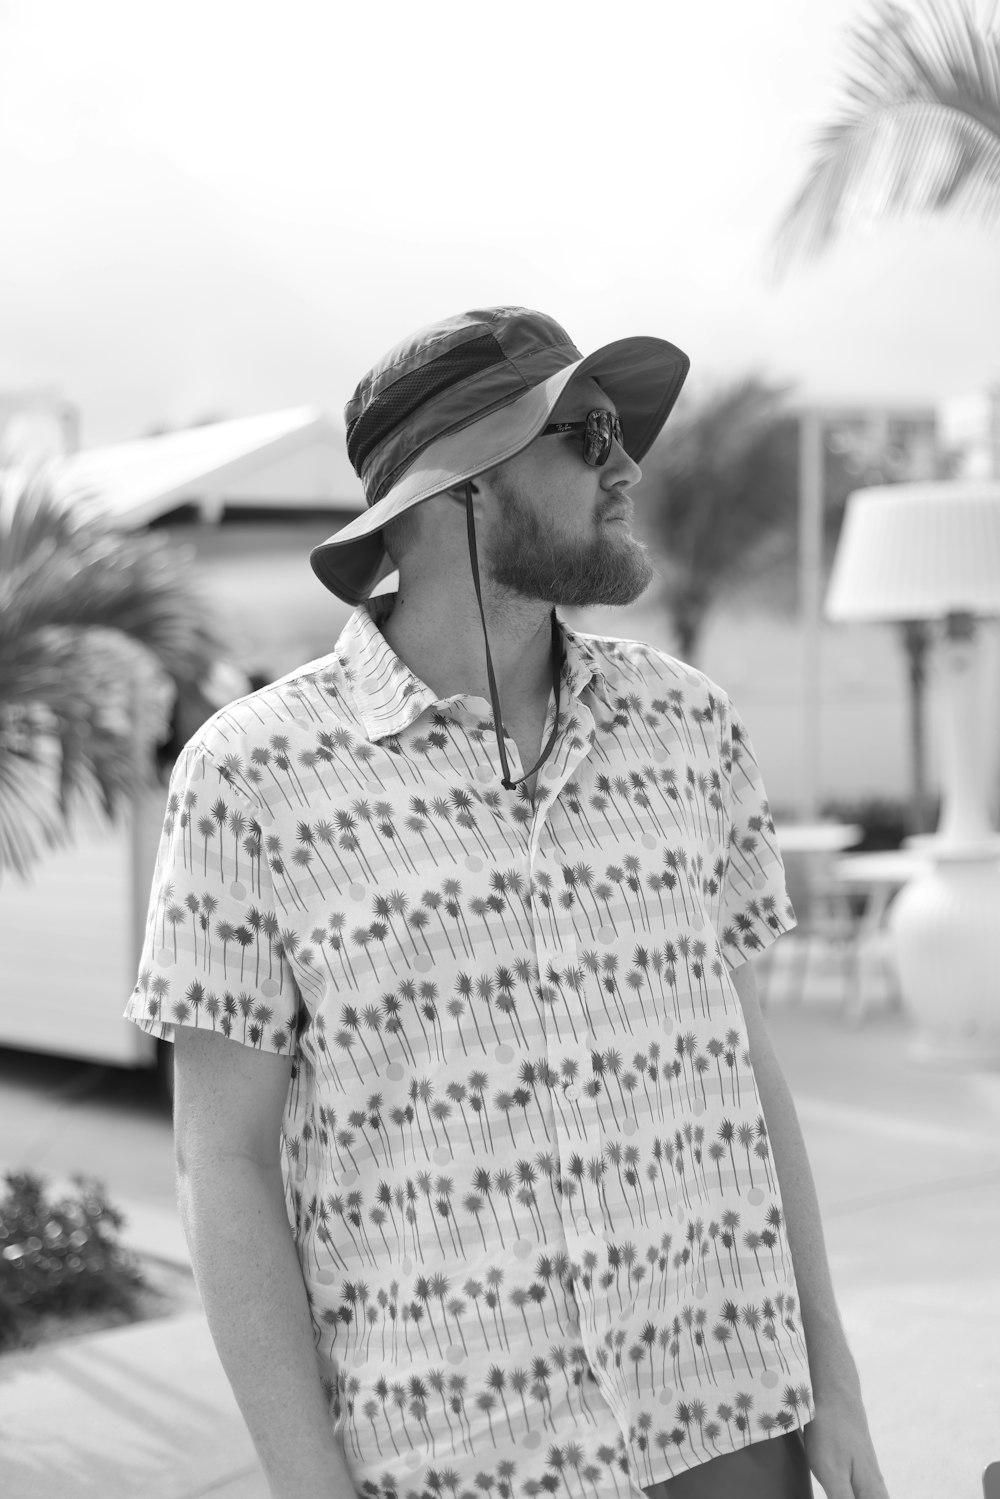 a man wearing a hat and sunglasses standing on a sidewalk